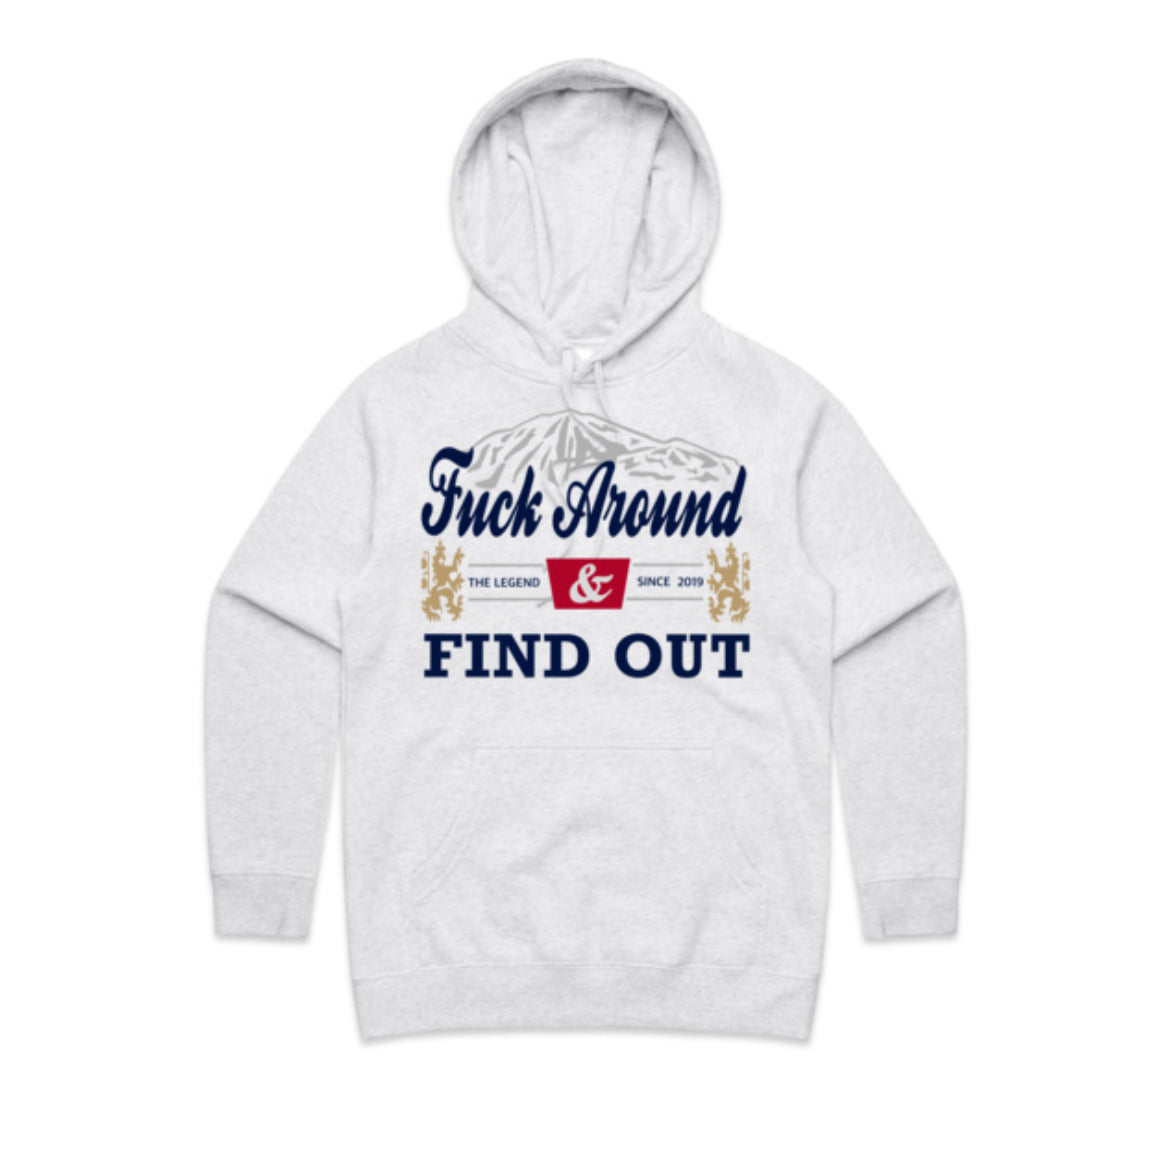 Fuck Around & Find Out Hoodie (ladies sizes)